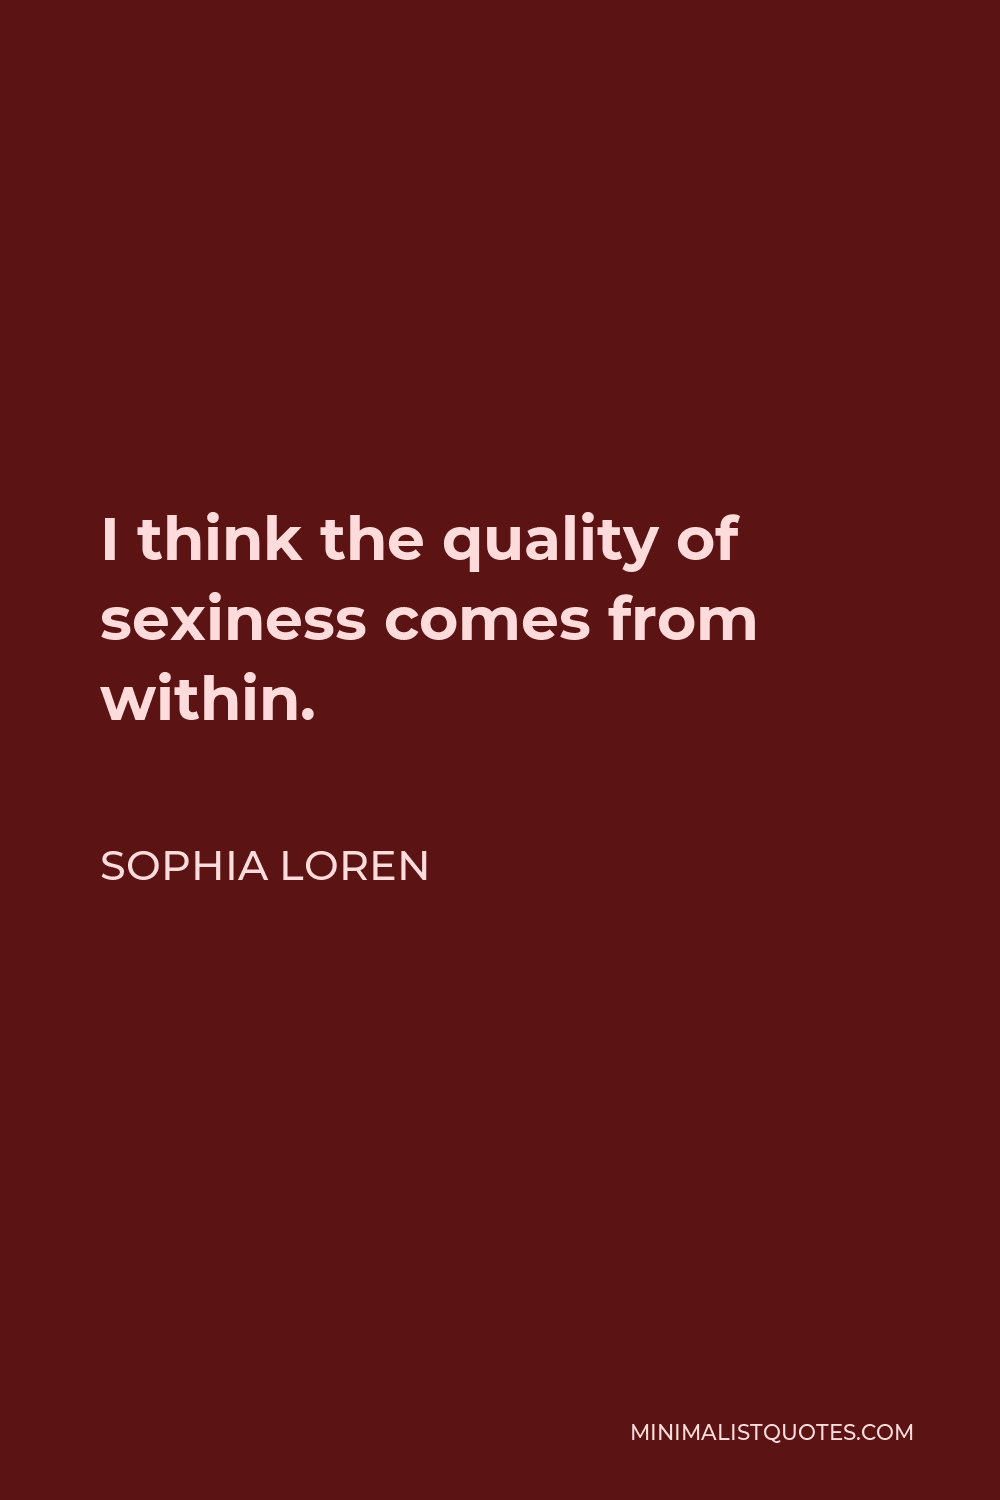 Sophia Loren Quote - I think the quality of sexiness comes from within. It is something that is in you or it isn’t and it really doesn’t have much to do with breasts or thighs or the pout of your lips.